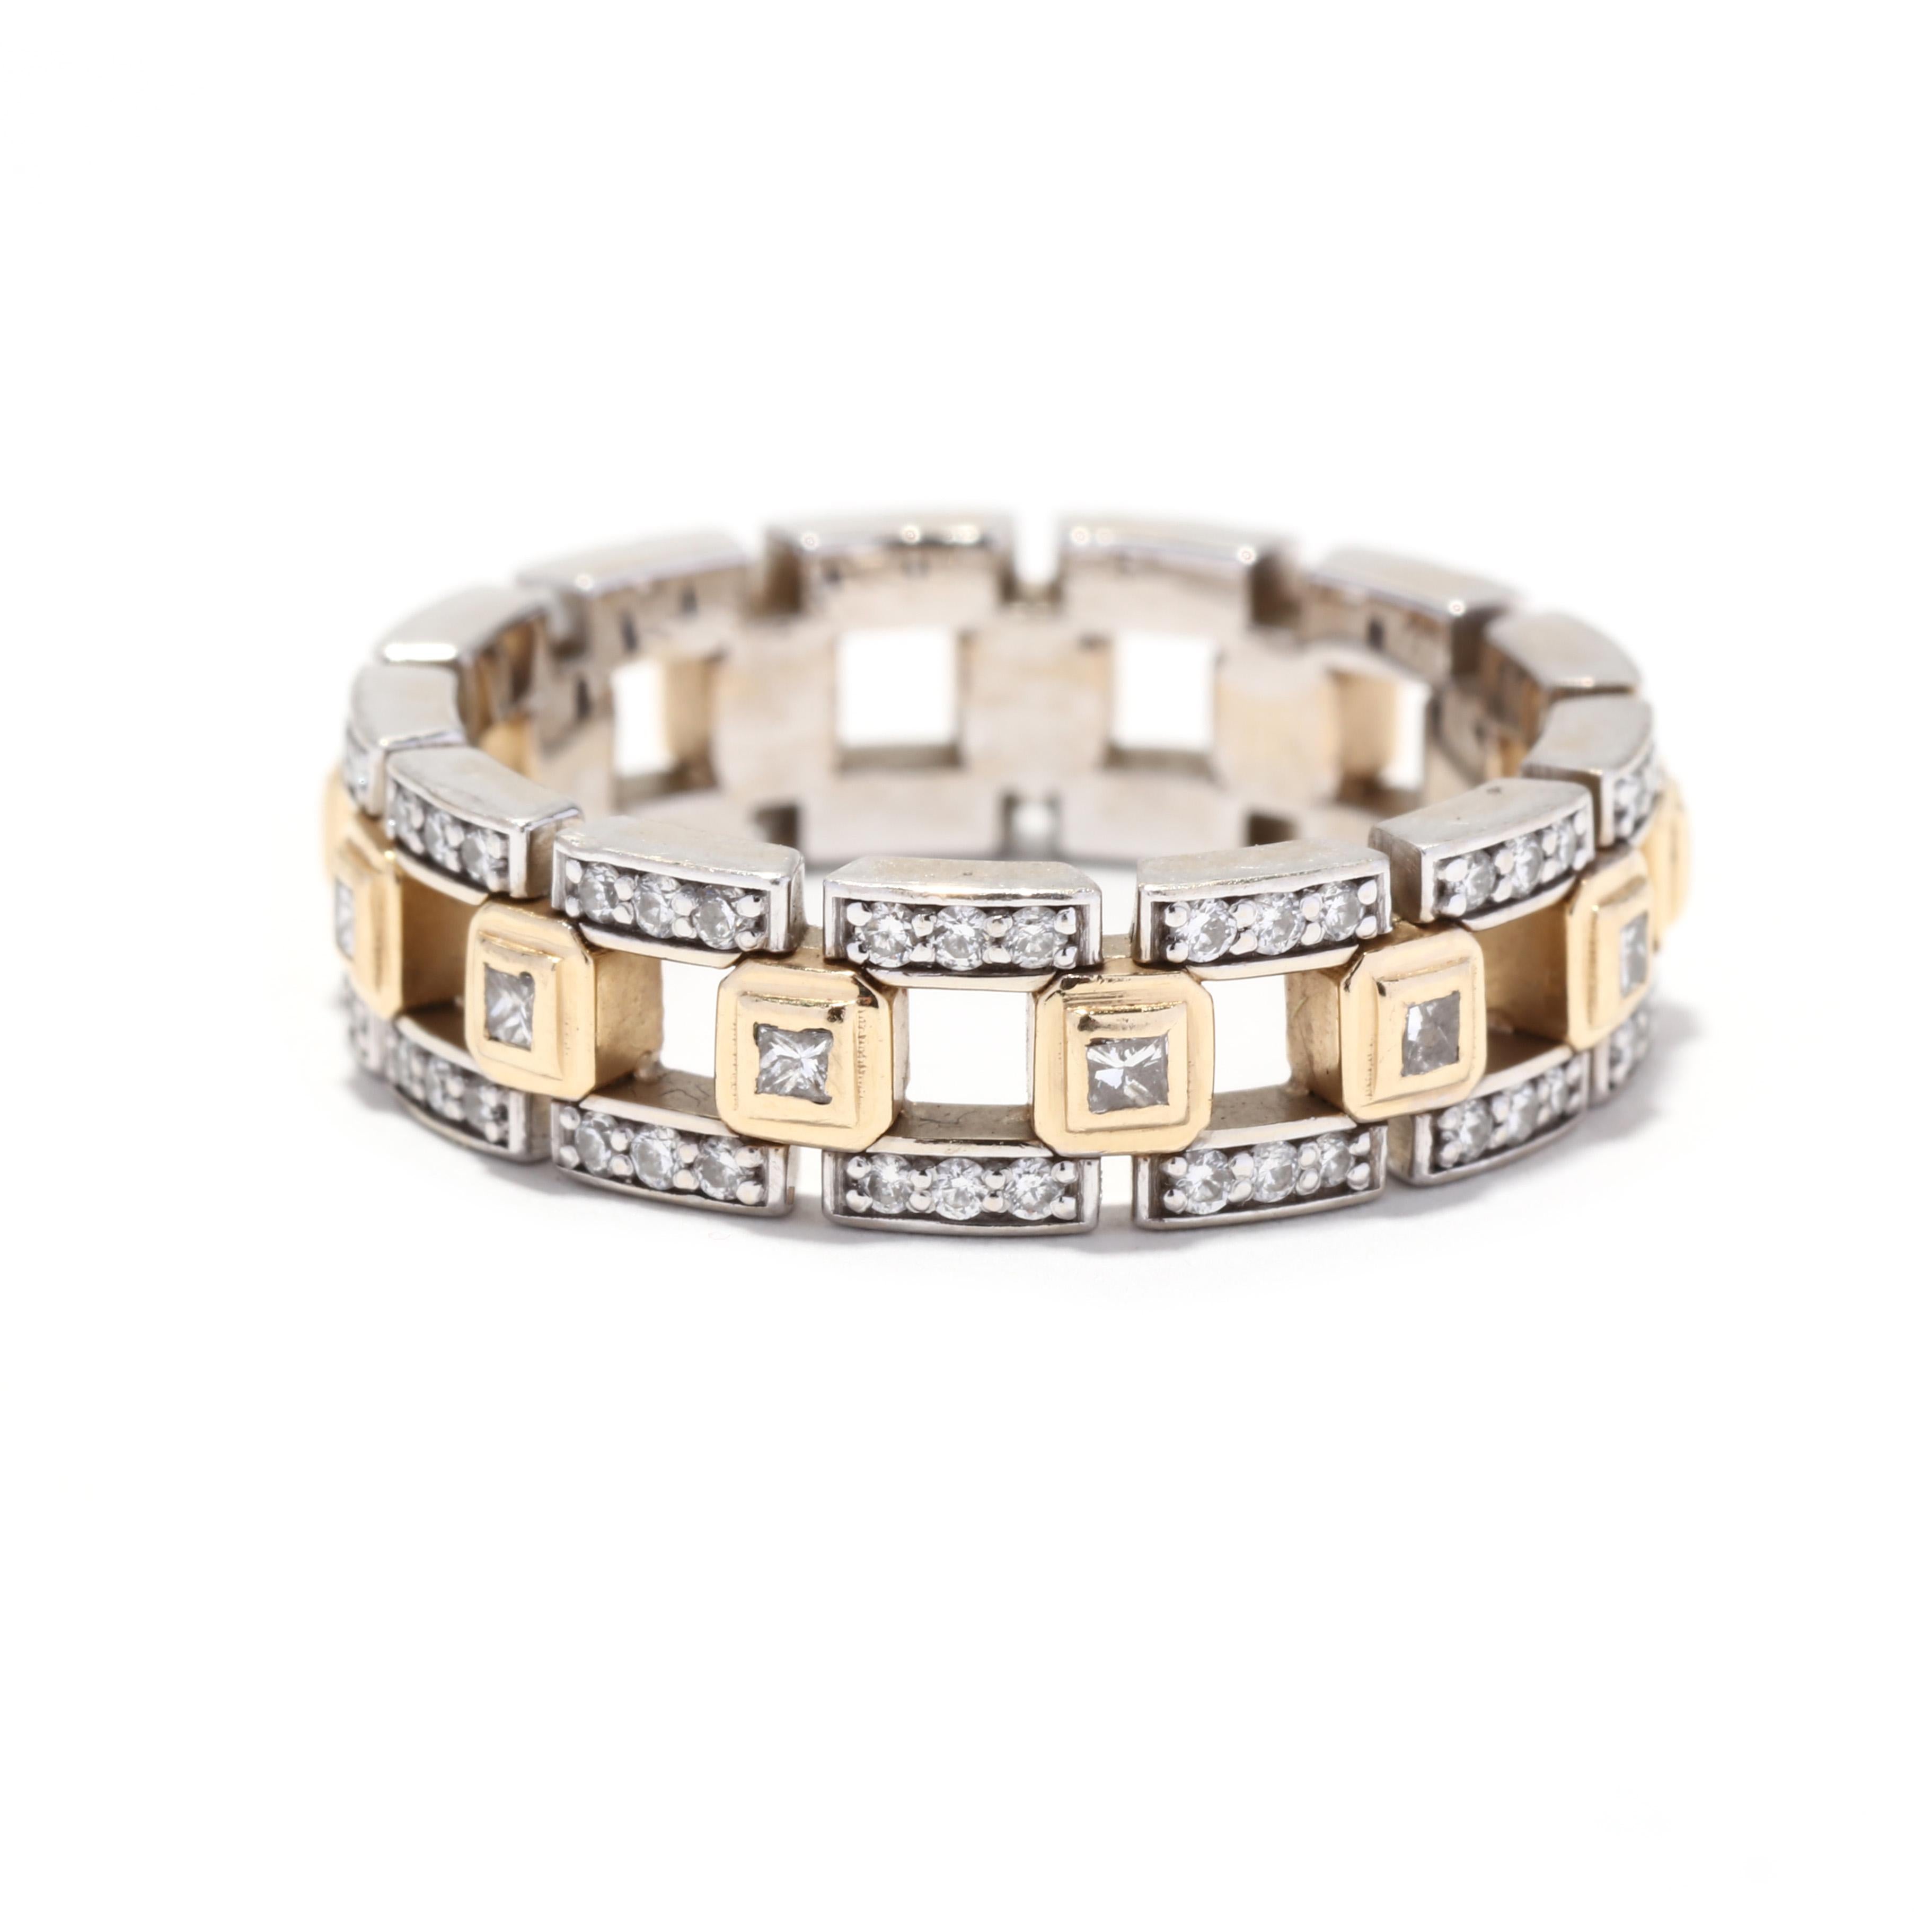 A vintage 14 karat yellow and white gold fancy diamond band. This wide band features spaced, bezel set princess cut diamonds set in yellow gold, connected together with bands of pavé set full cut round diamonds set in white gold and in an eternity